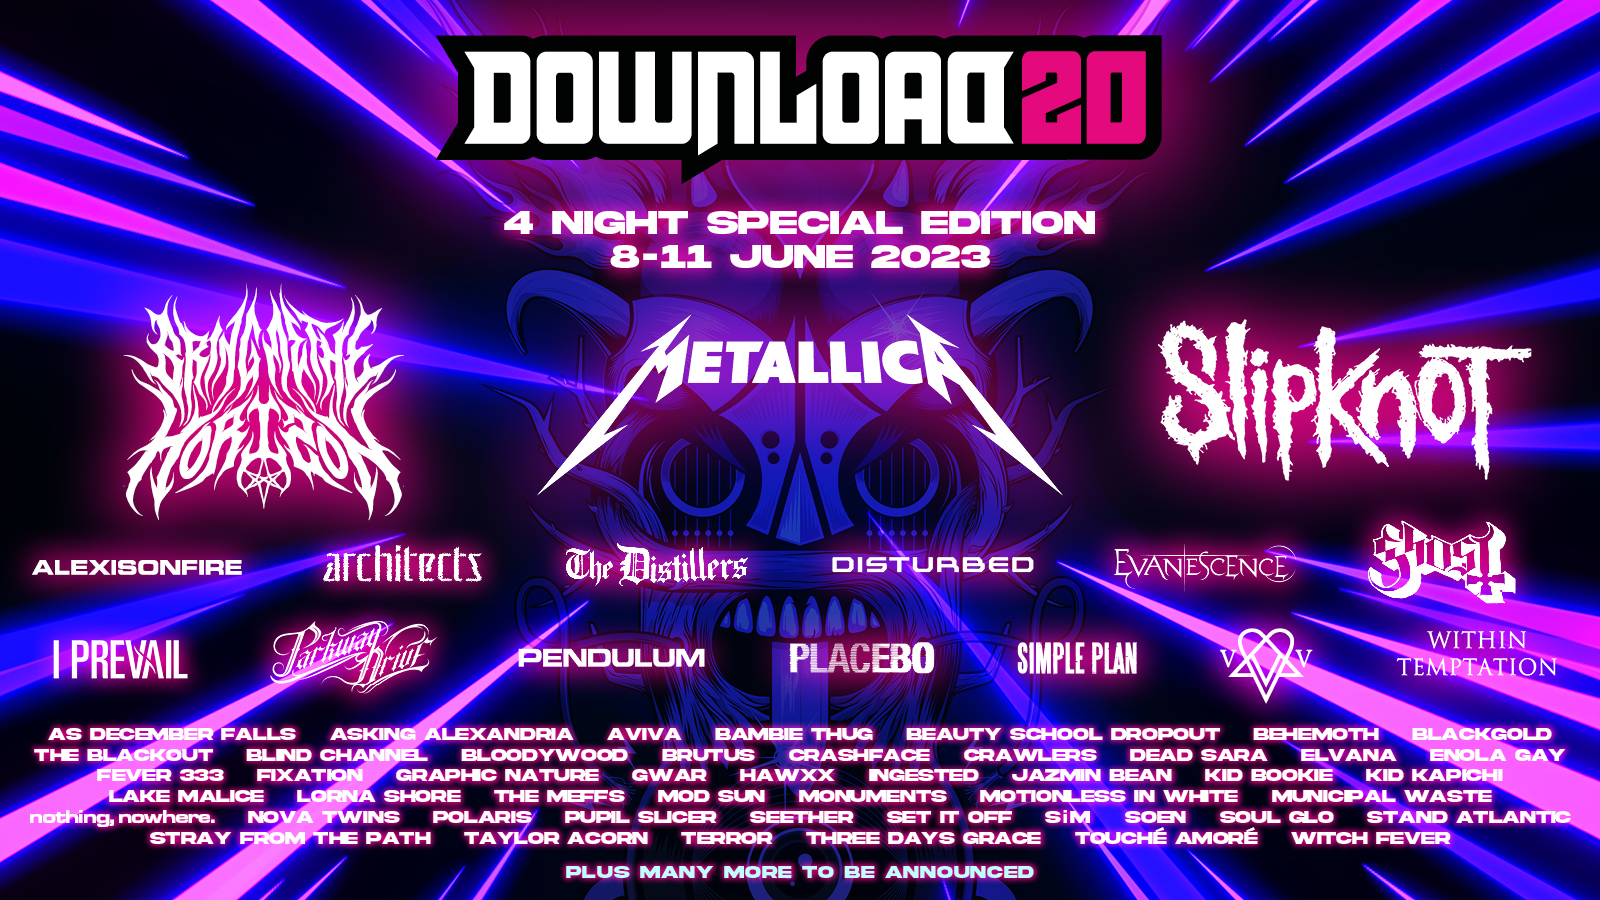 Download Festival featuring Disturbed 